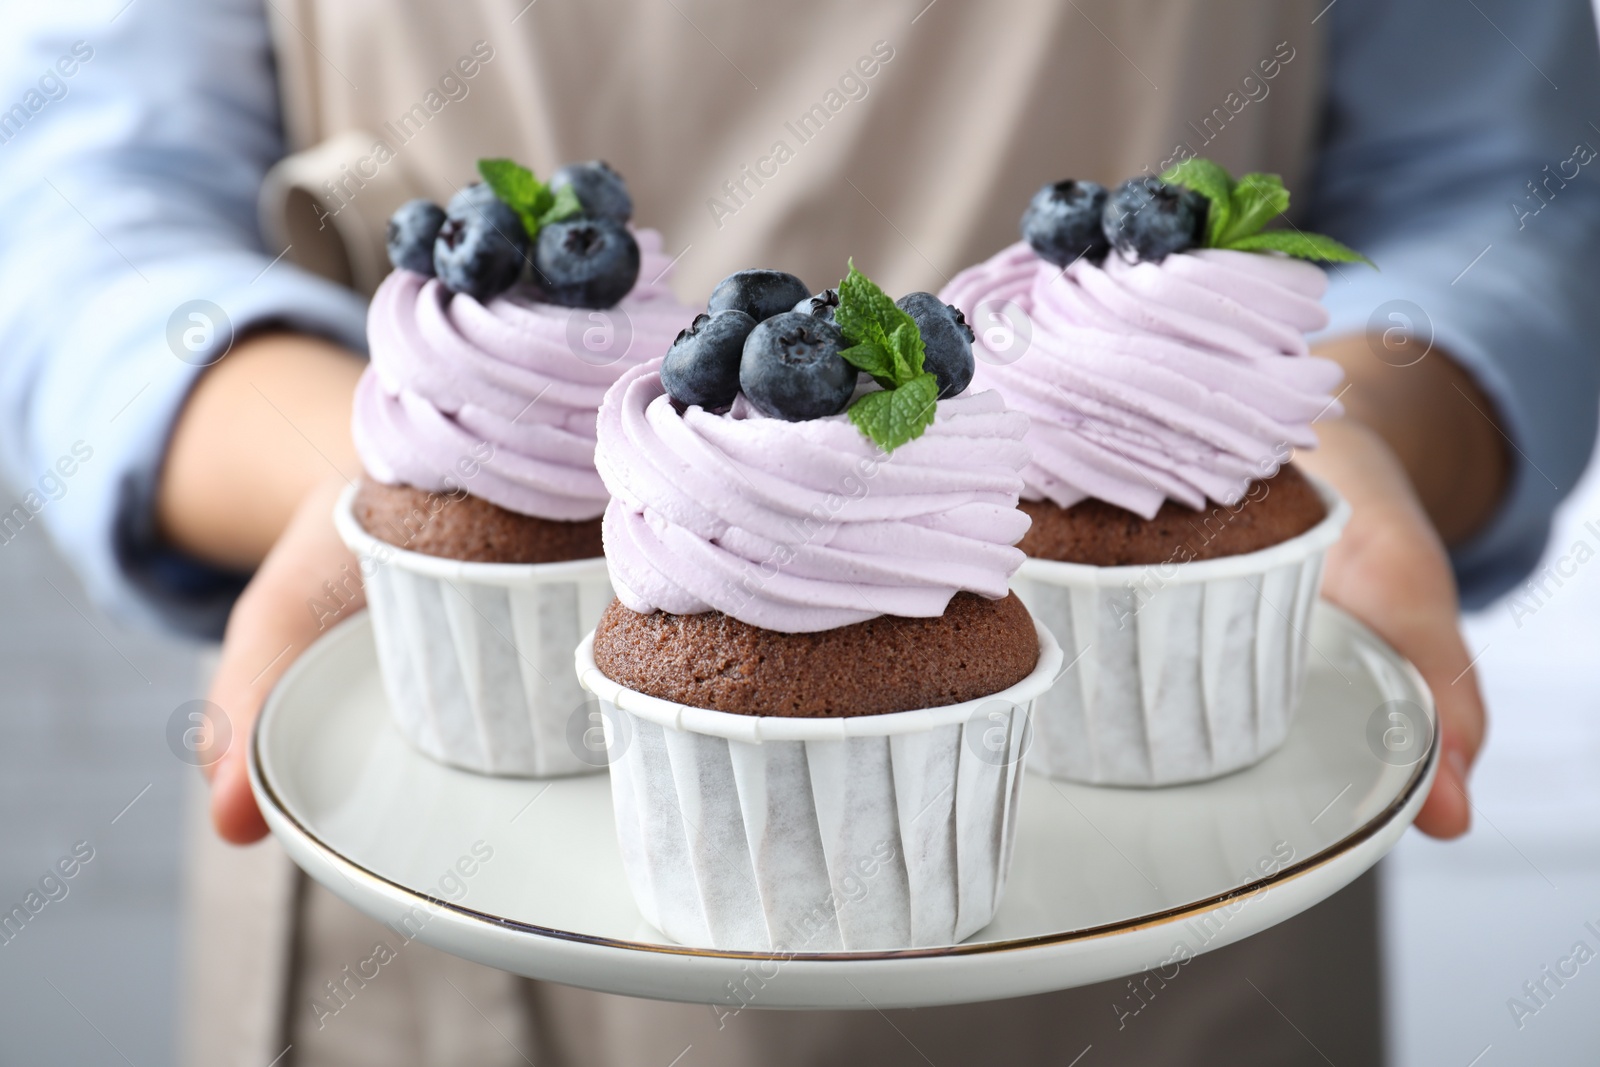 Photo of Woman holding plate with sweet cupcakes, closeup